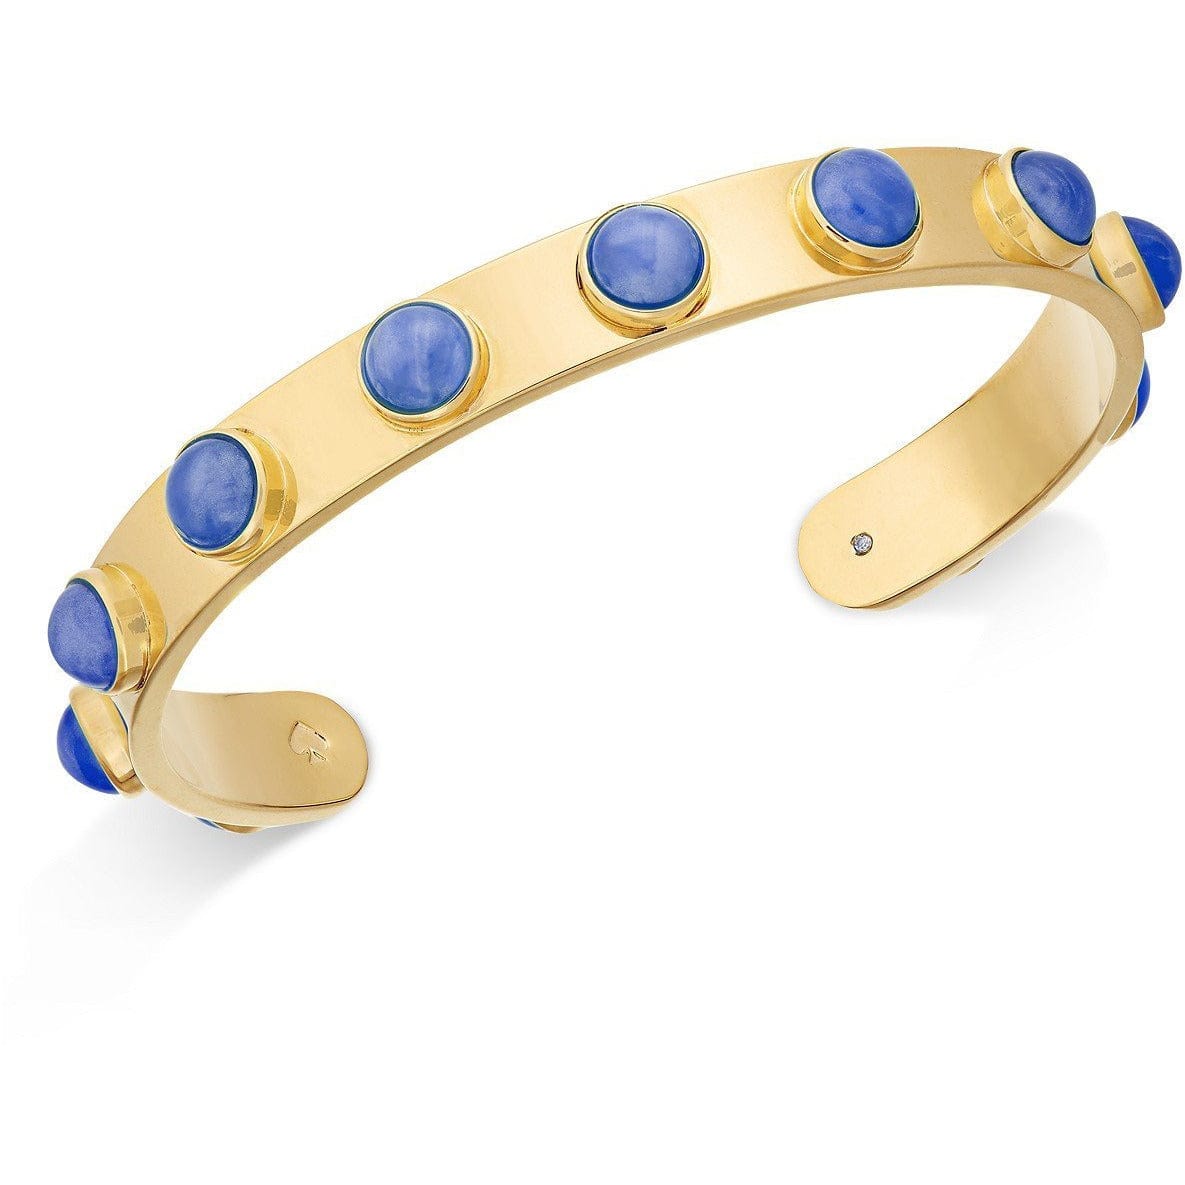 Kate Spade NY Gold-Tone Bezel Stone Cuff Bracelet - The Pink Pigs, A Compassionate Boutique